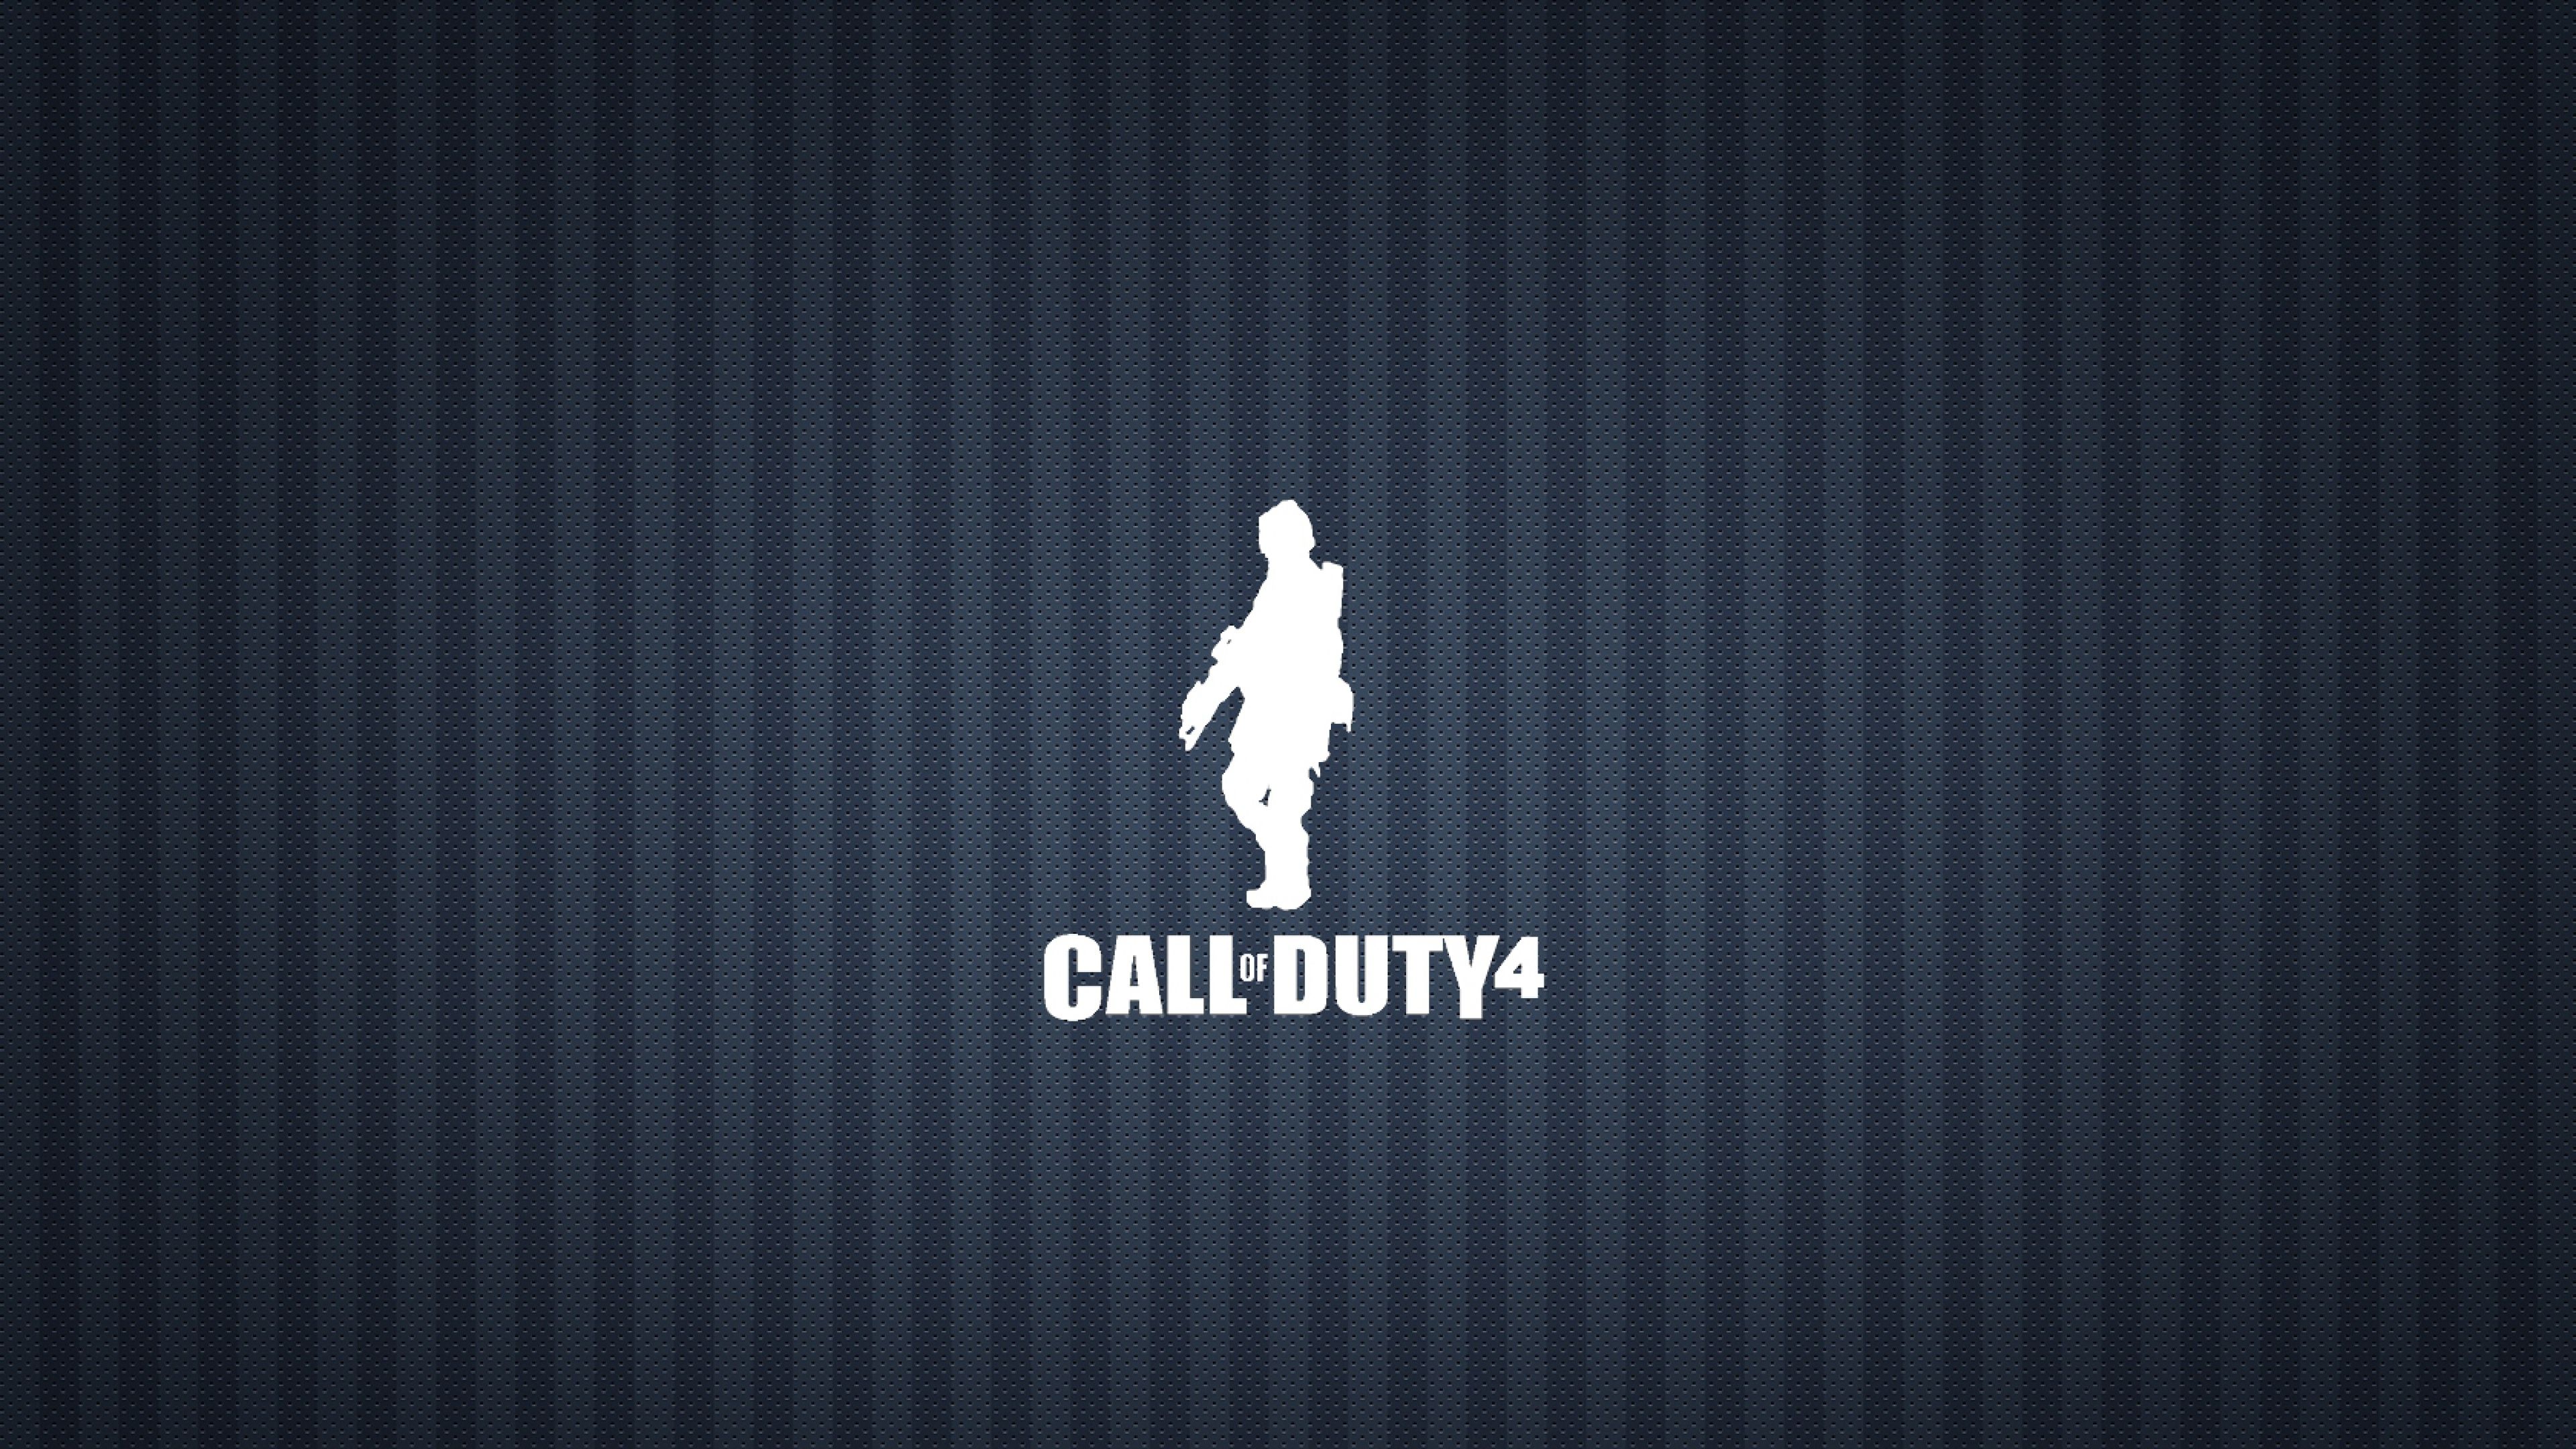 Download Wallpaper 3840x2160 Call of duty 4, Background, Game